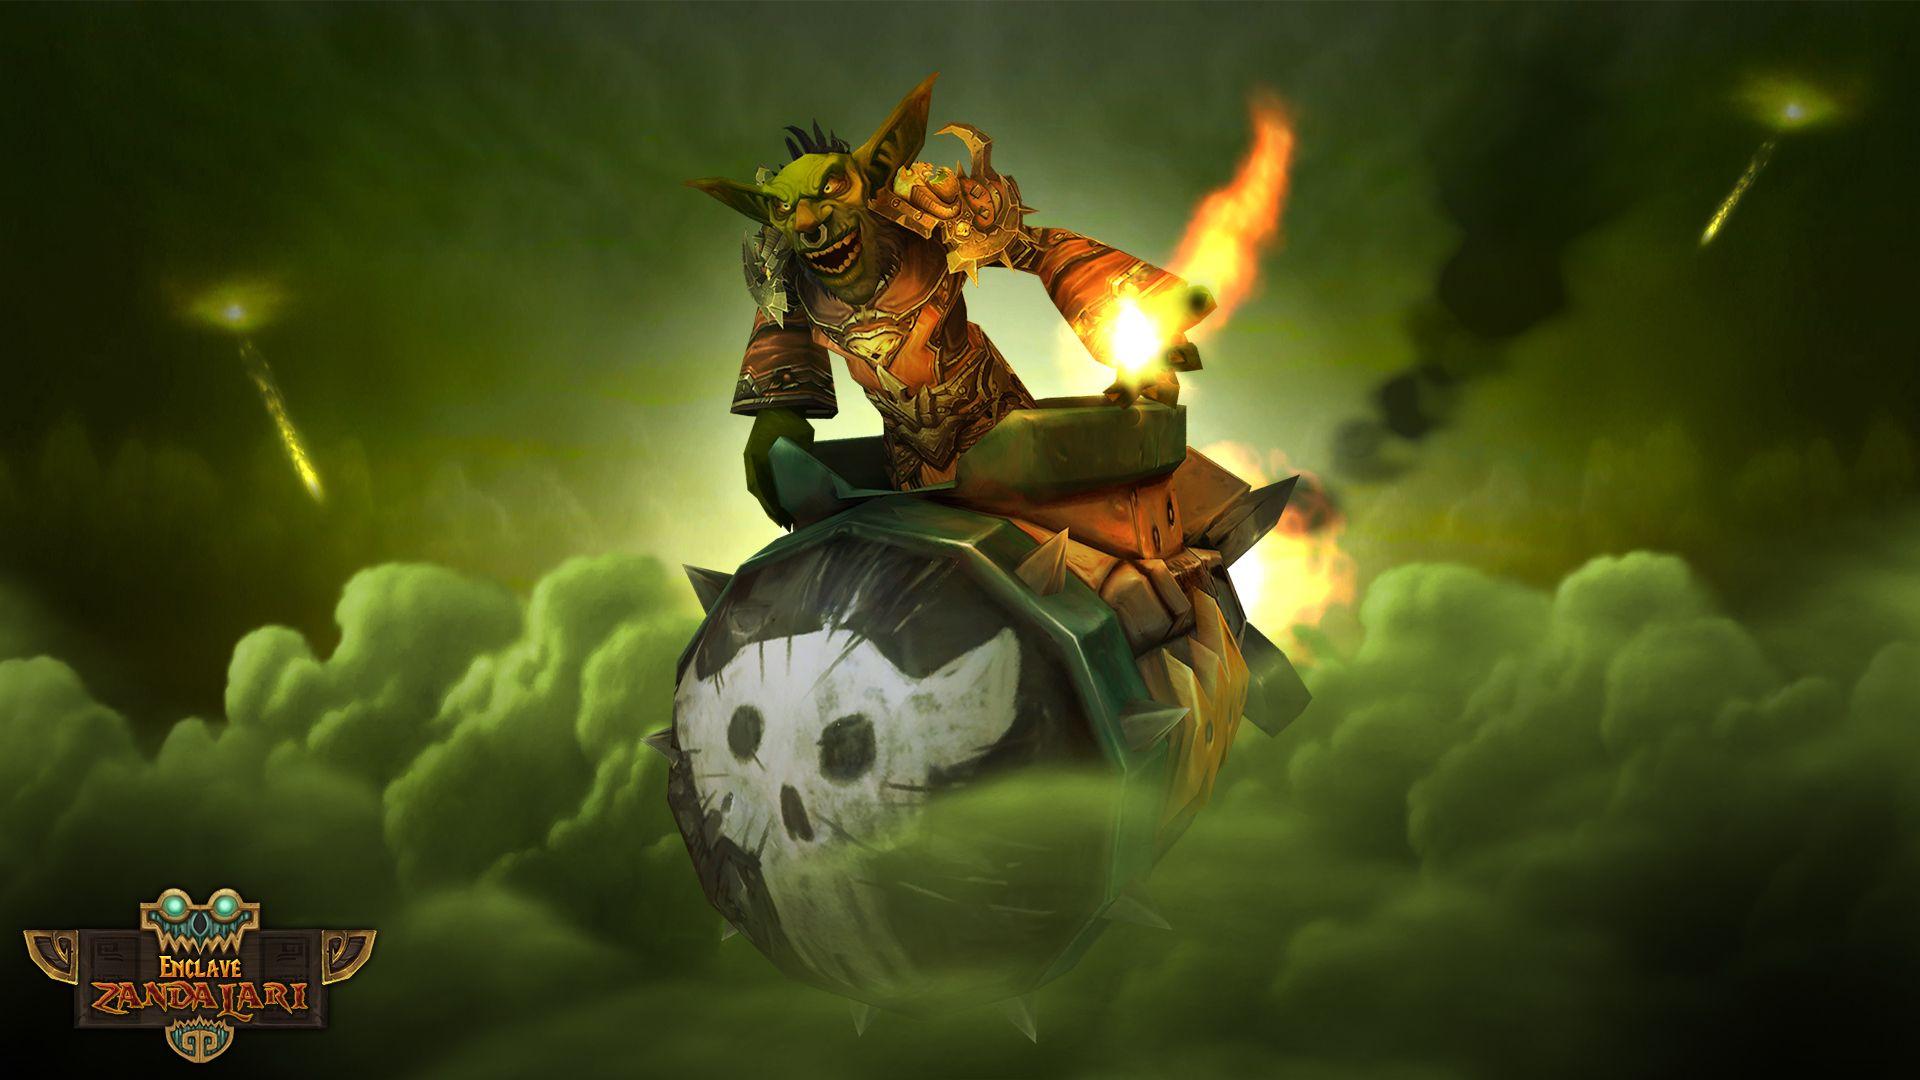 Goblin Warcraft HD Wallpaper Free Download for PC